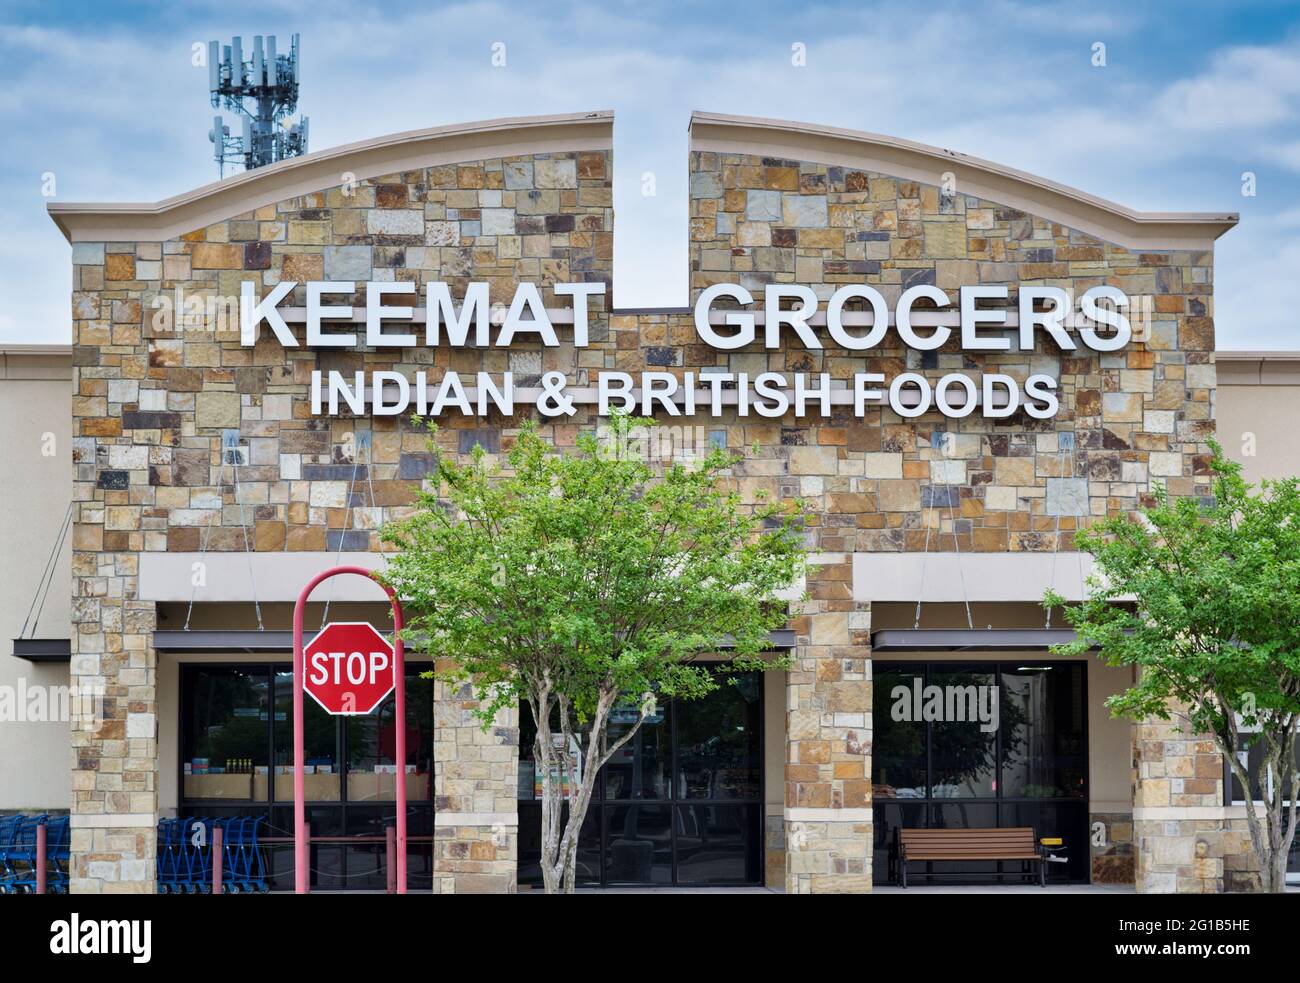 Houston, Texas USA 06-03-2021: Keemat Grocers storefront exterior. Local Indian and British foods shop in Houston, TX, established in 1994. Stock Photo